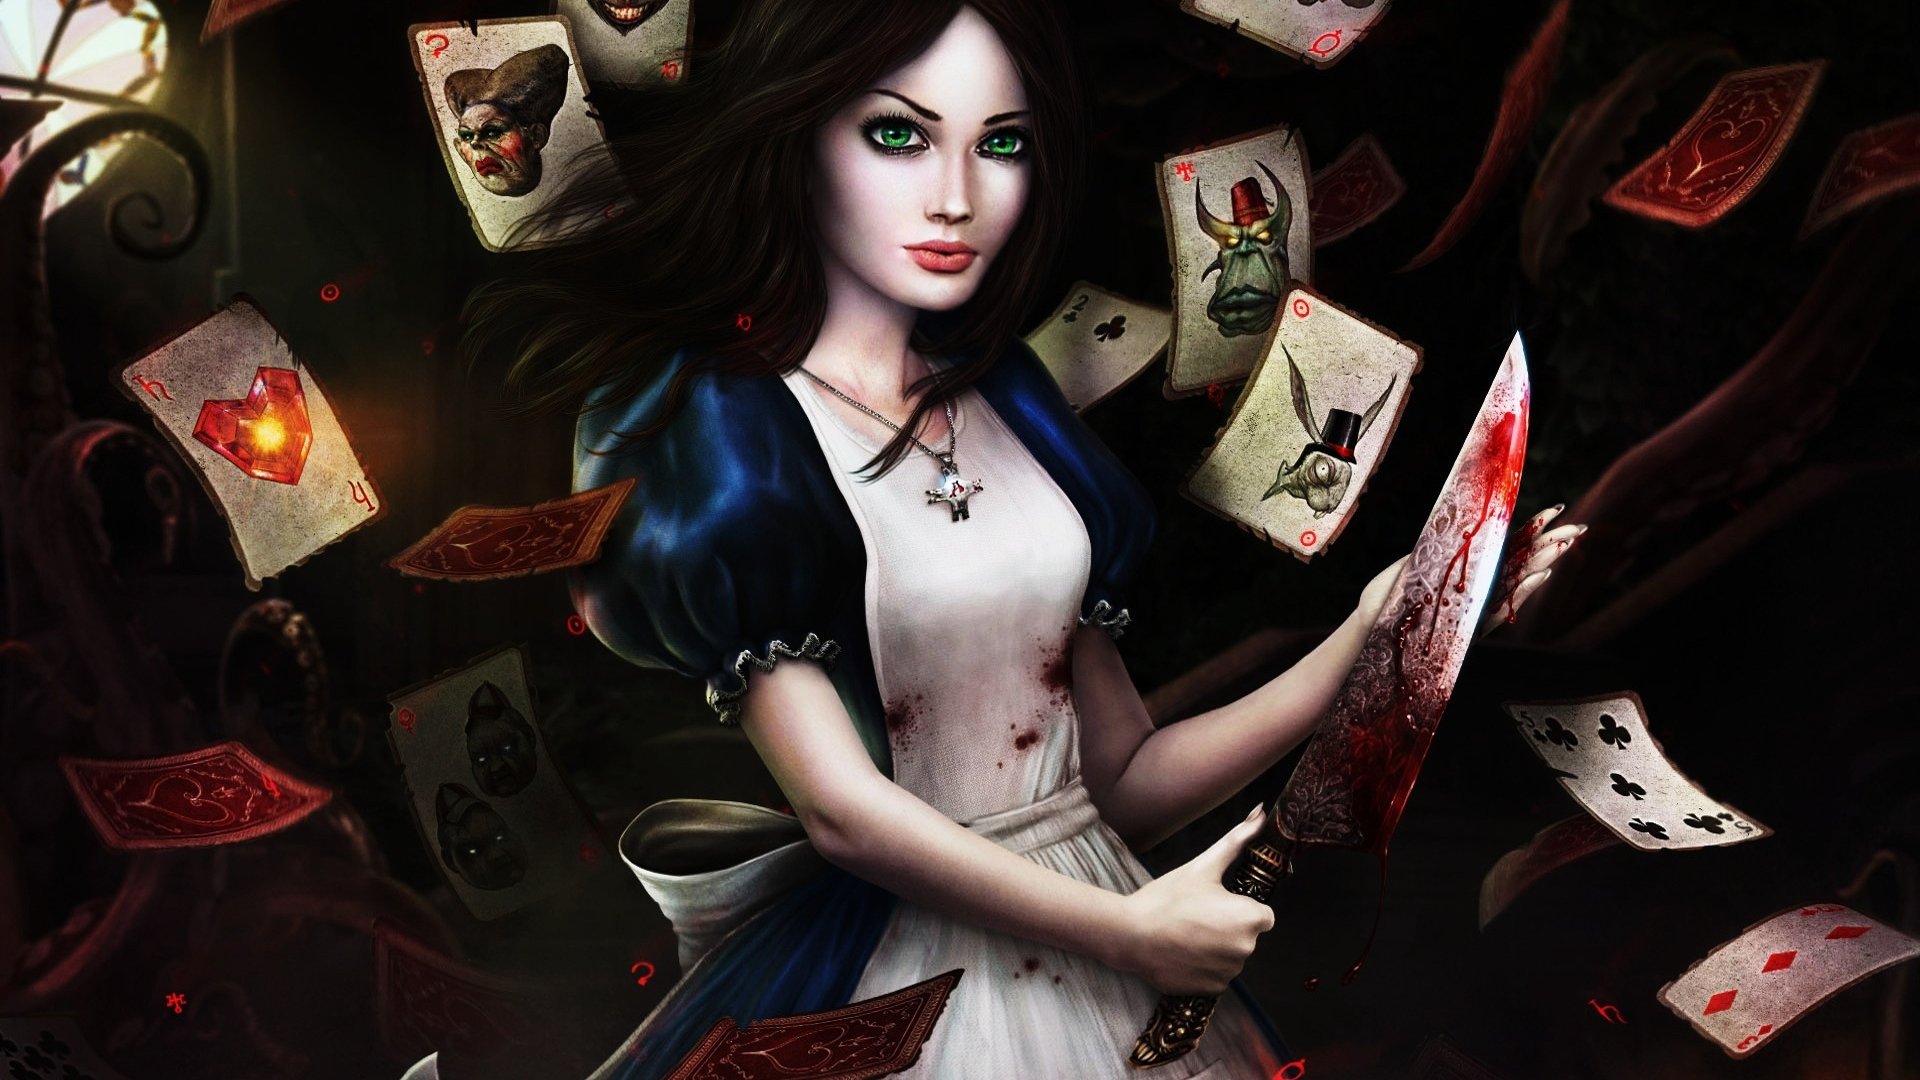 Best Alice: Madness Returns wallpaper ID:27653 for High Resolution 1080p computer